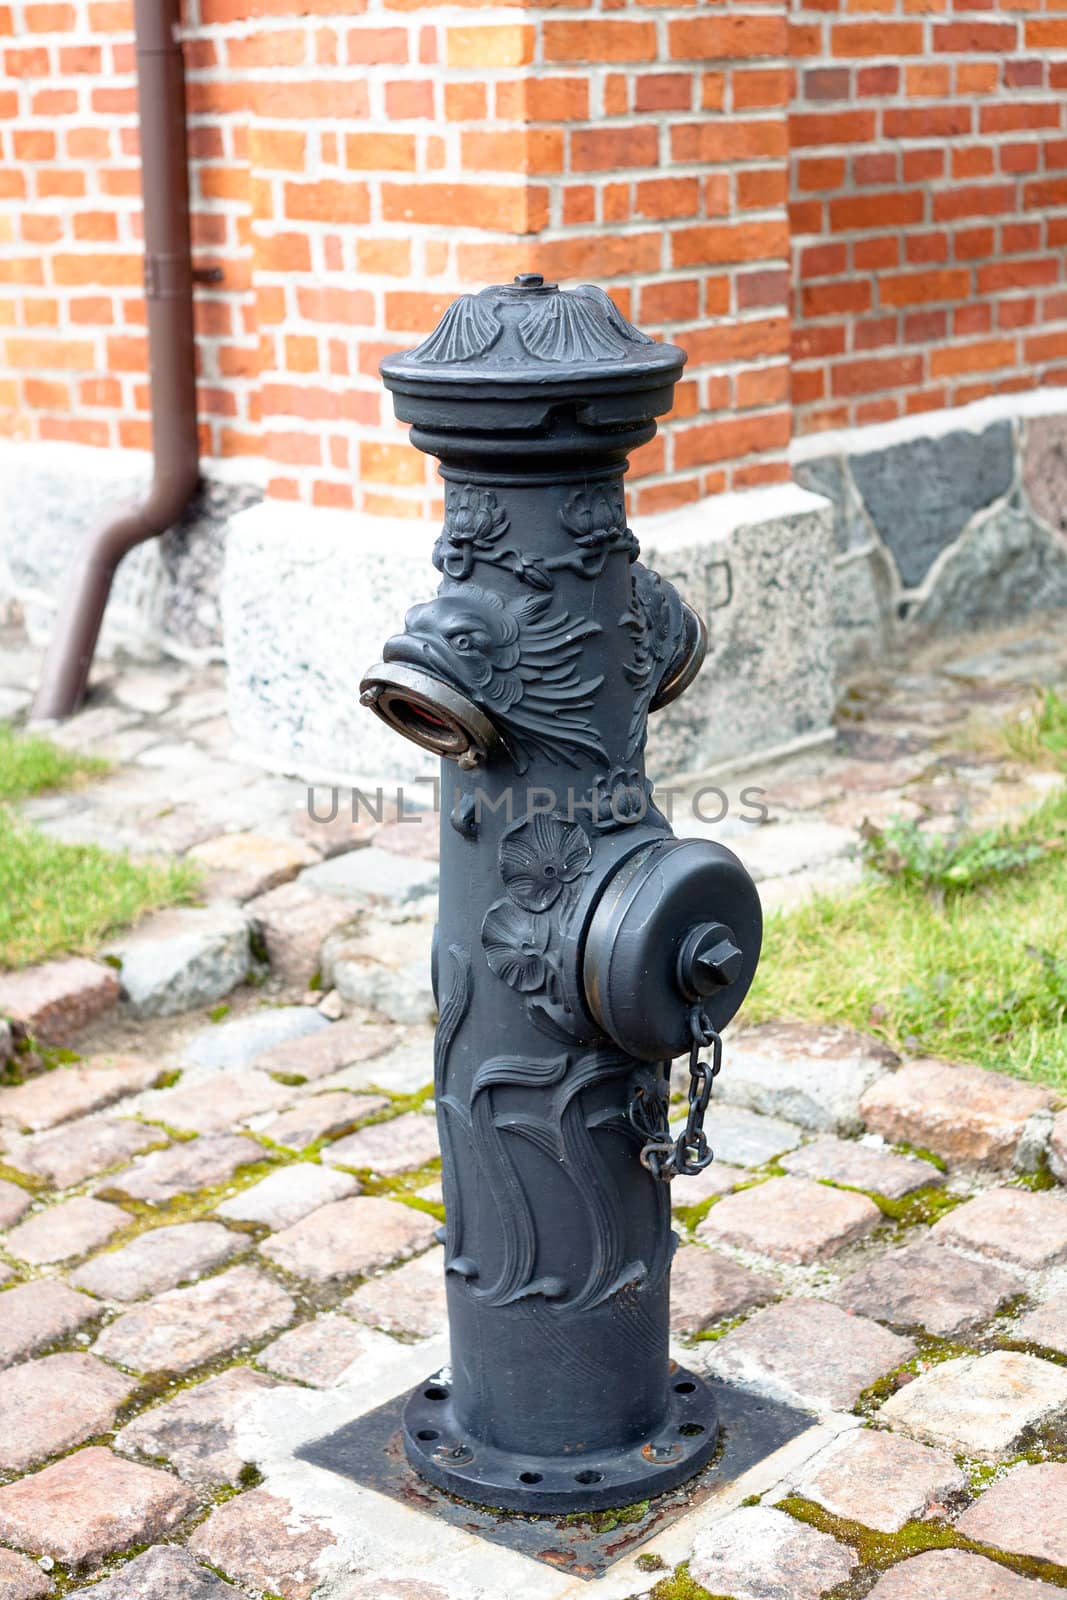 An old water pump in a form of monster

